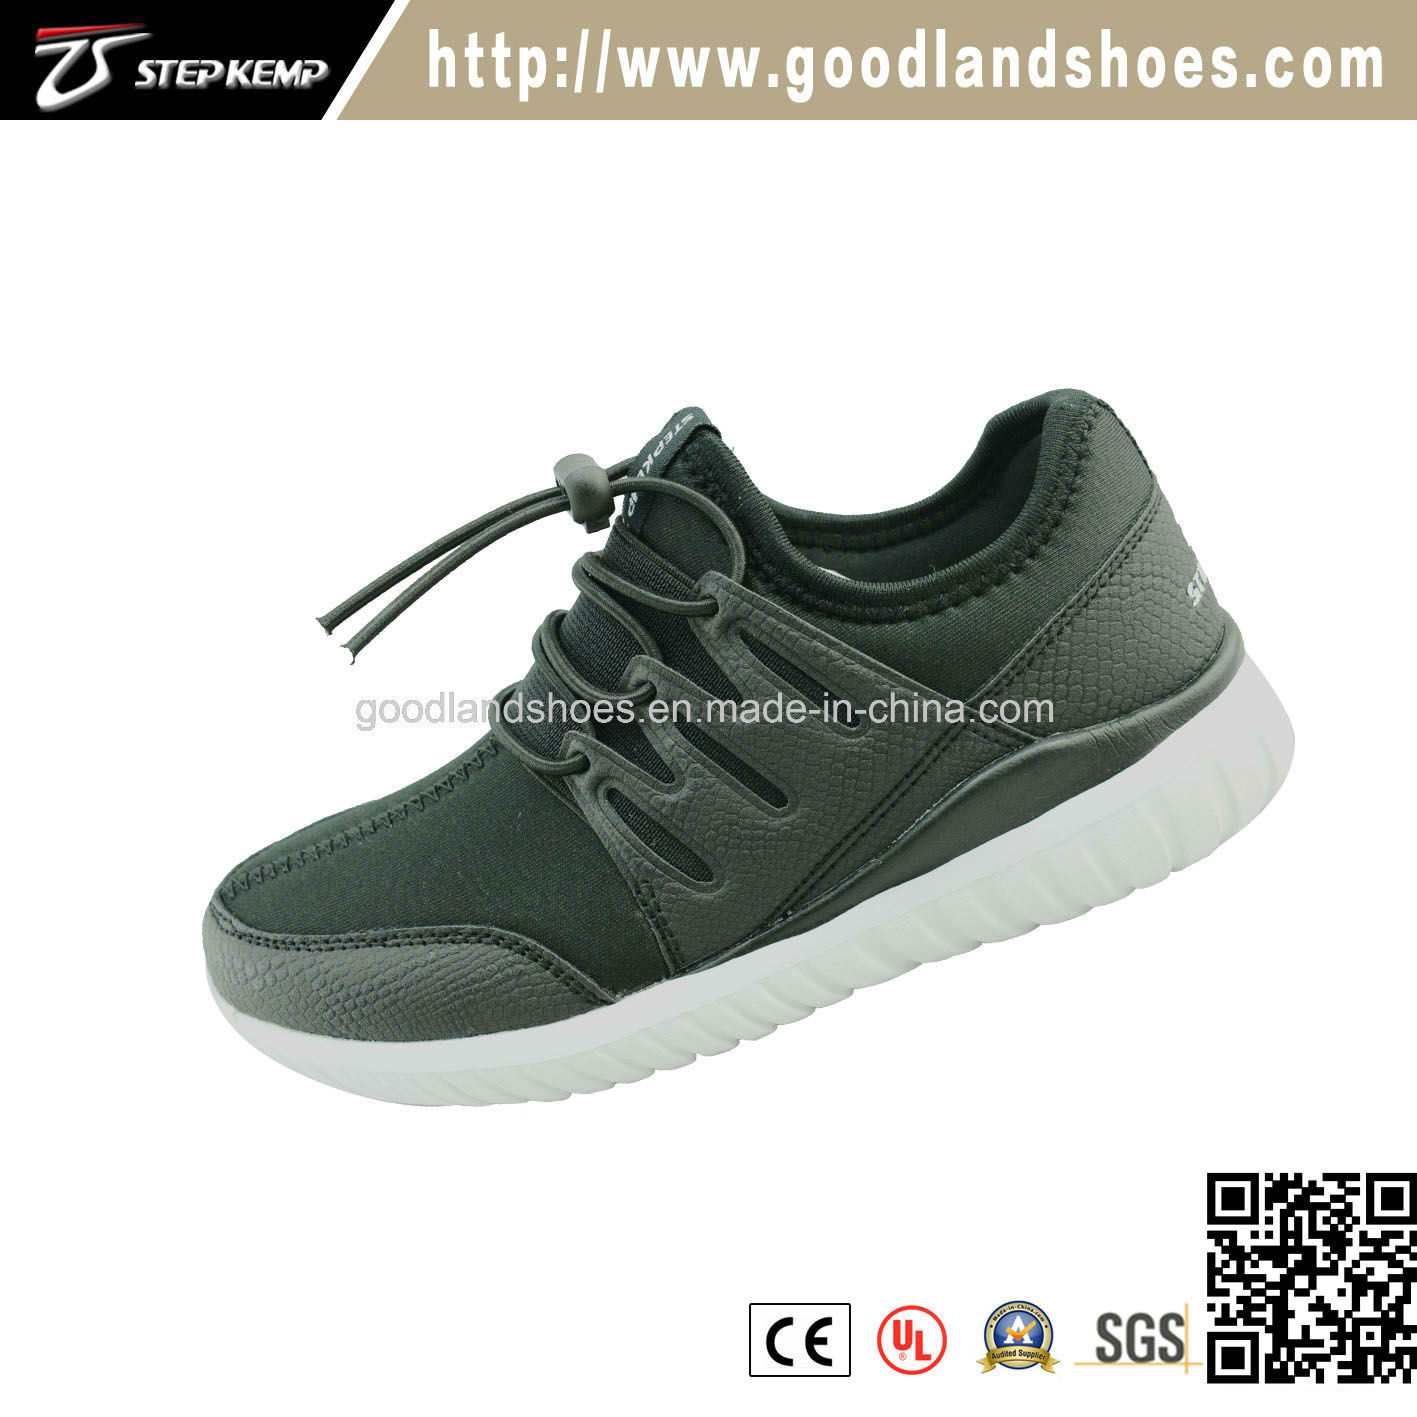 New Fashion Design Running Children Shoes From Goodlandshoes16014-3